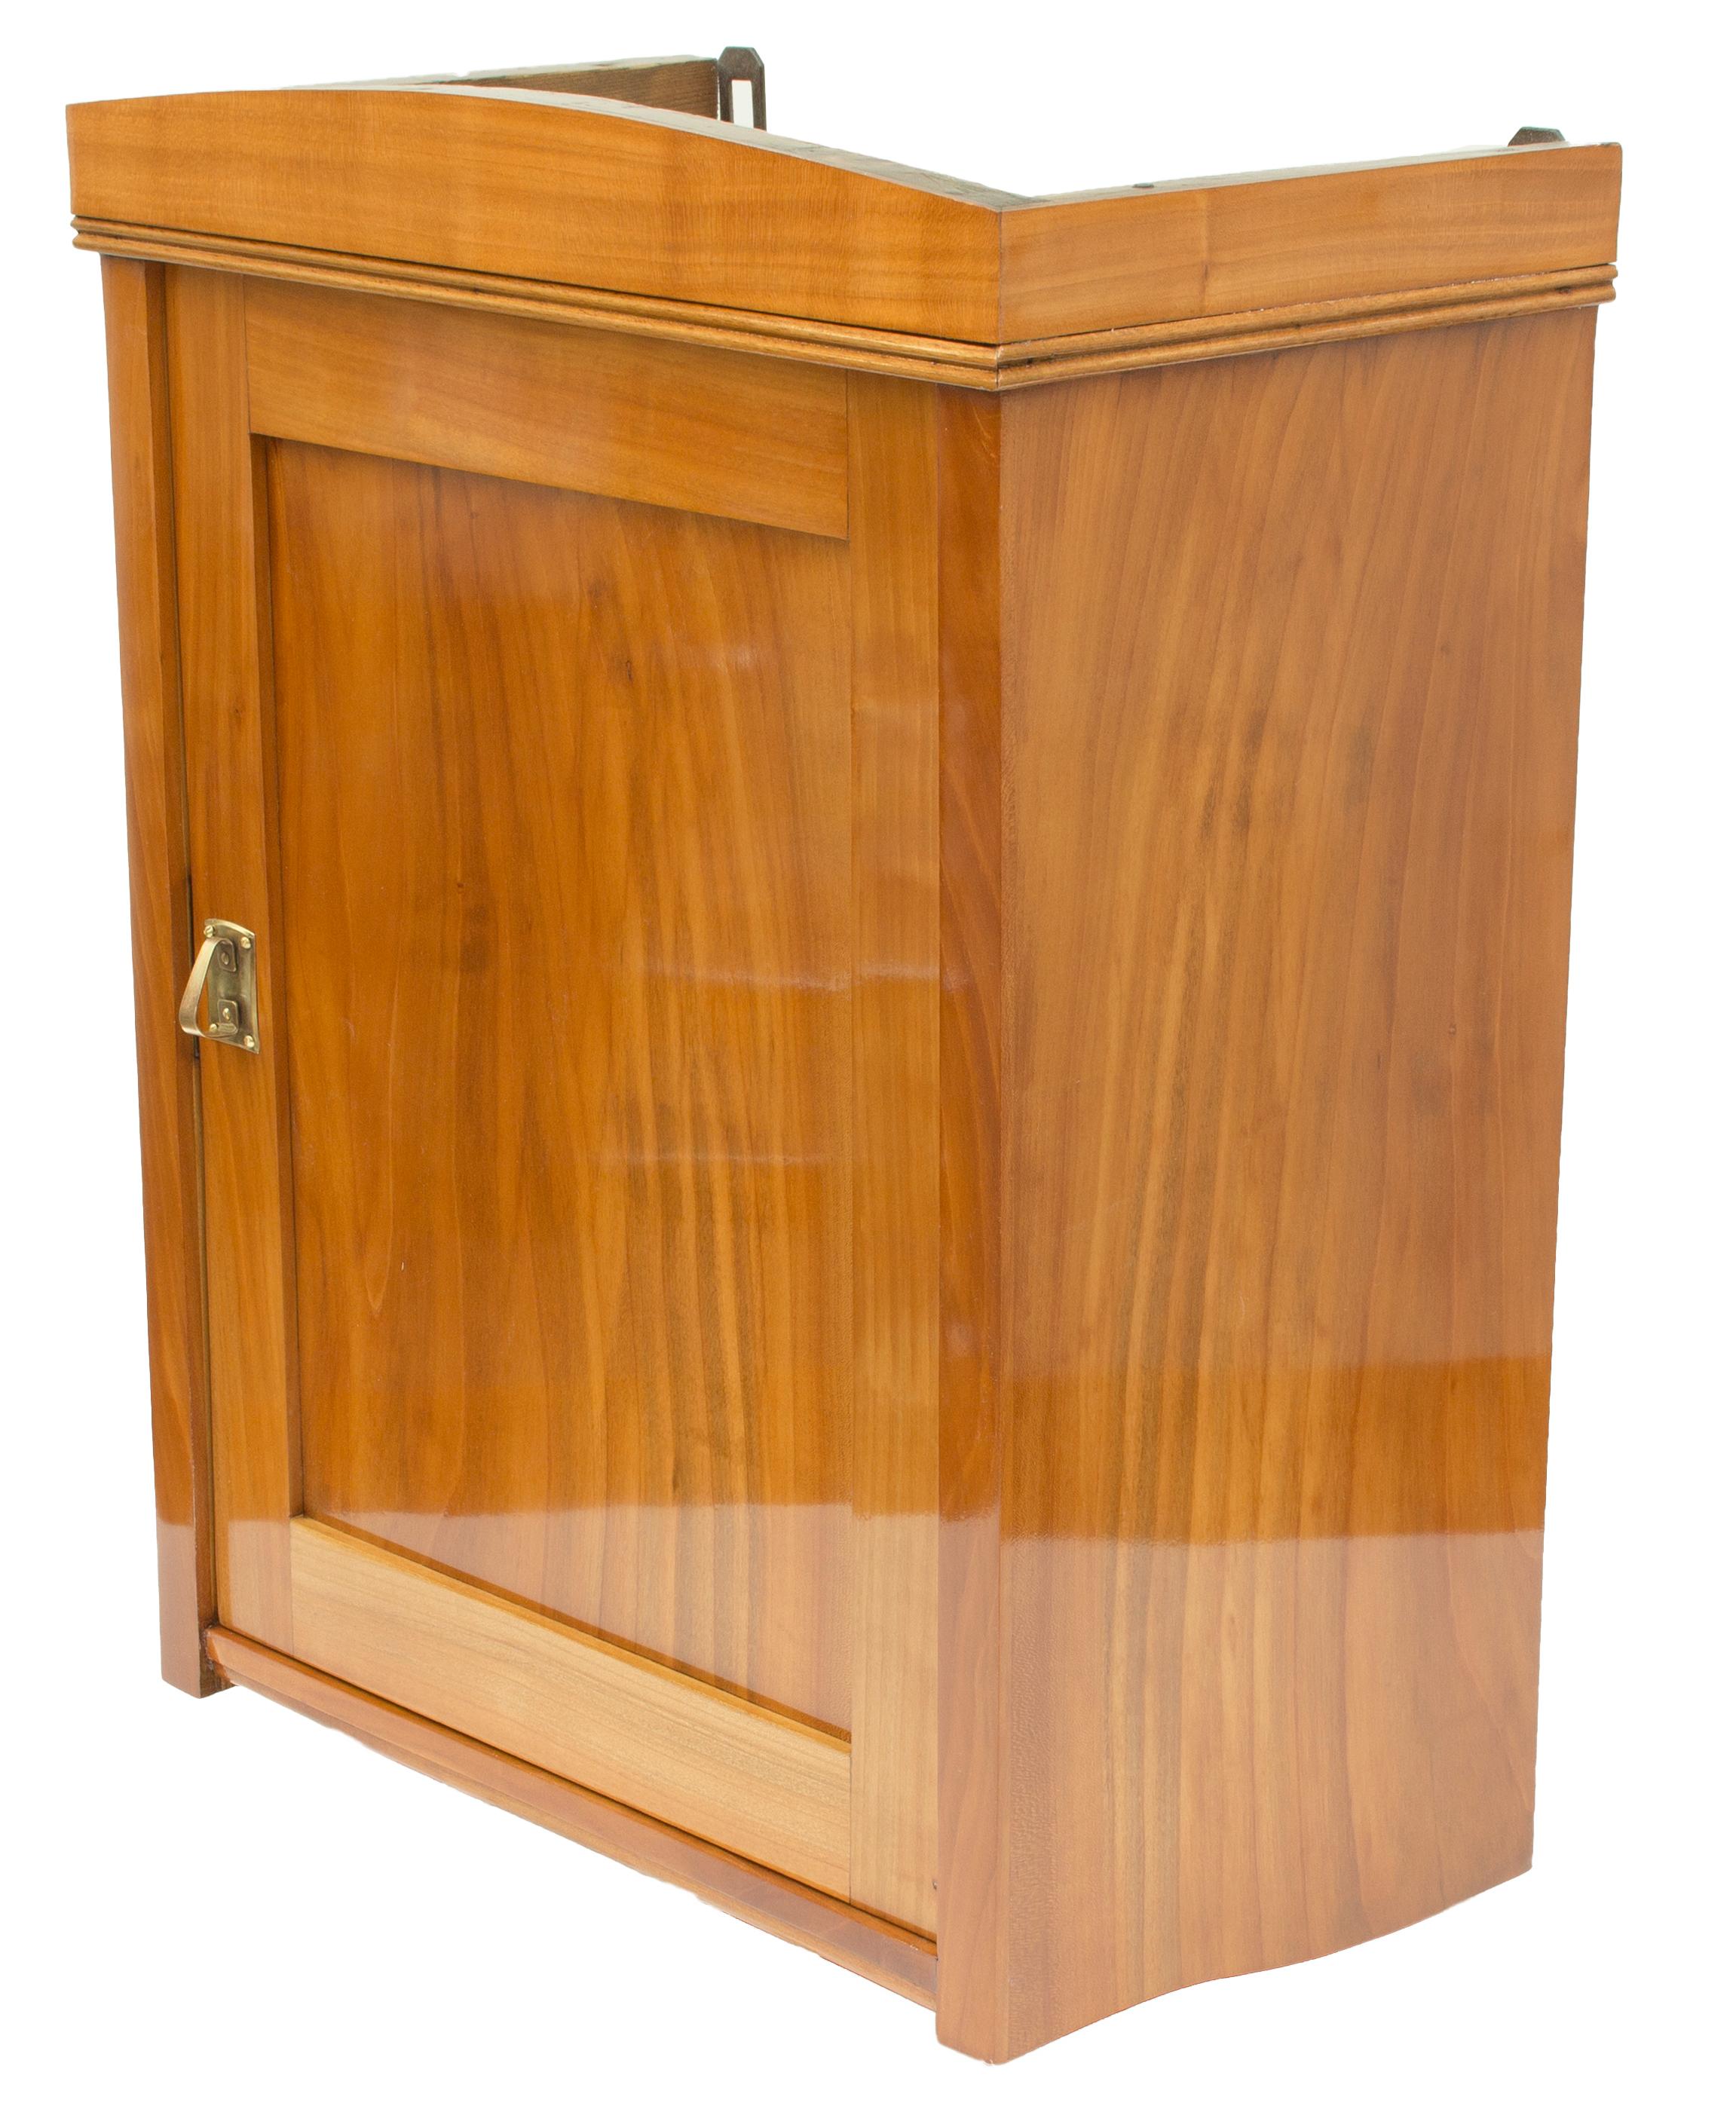 Late 19th Century Art Nouveau Cherry Hanging Wall Cabinet 1